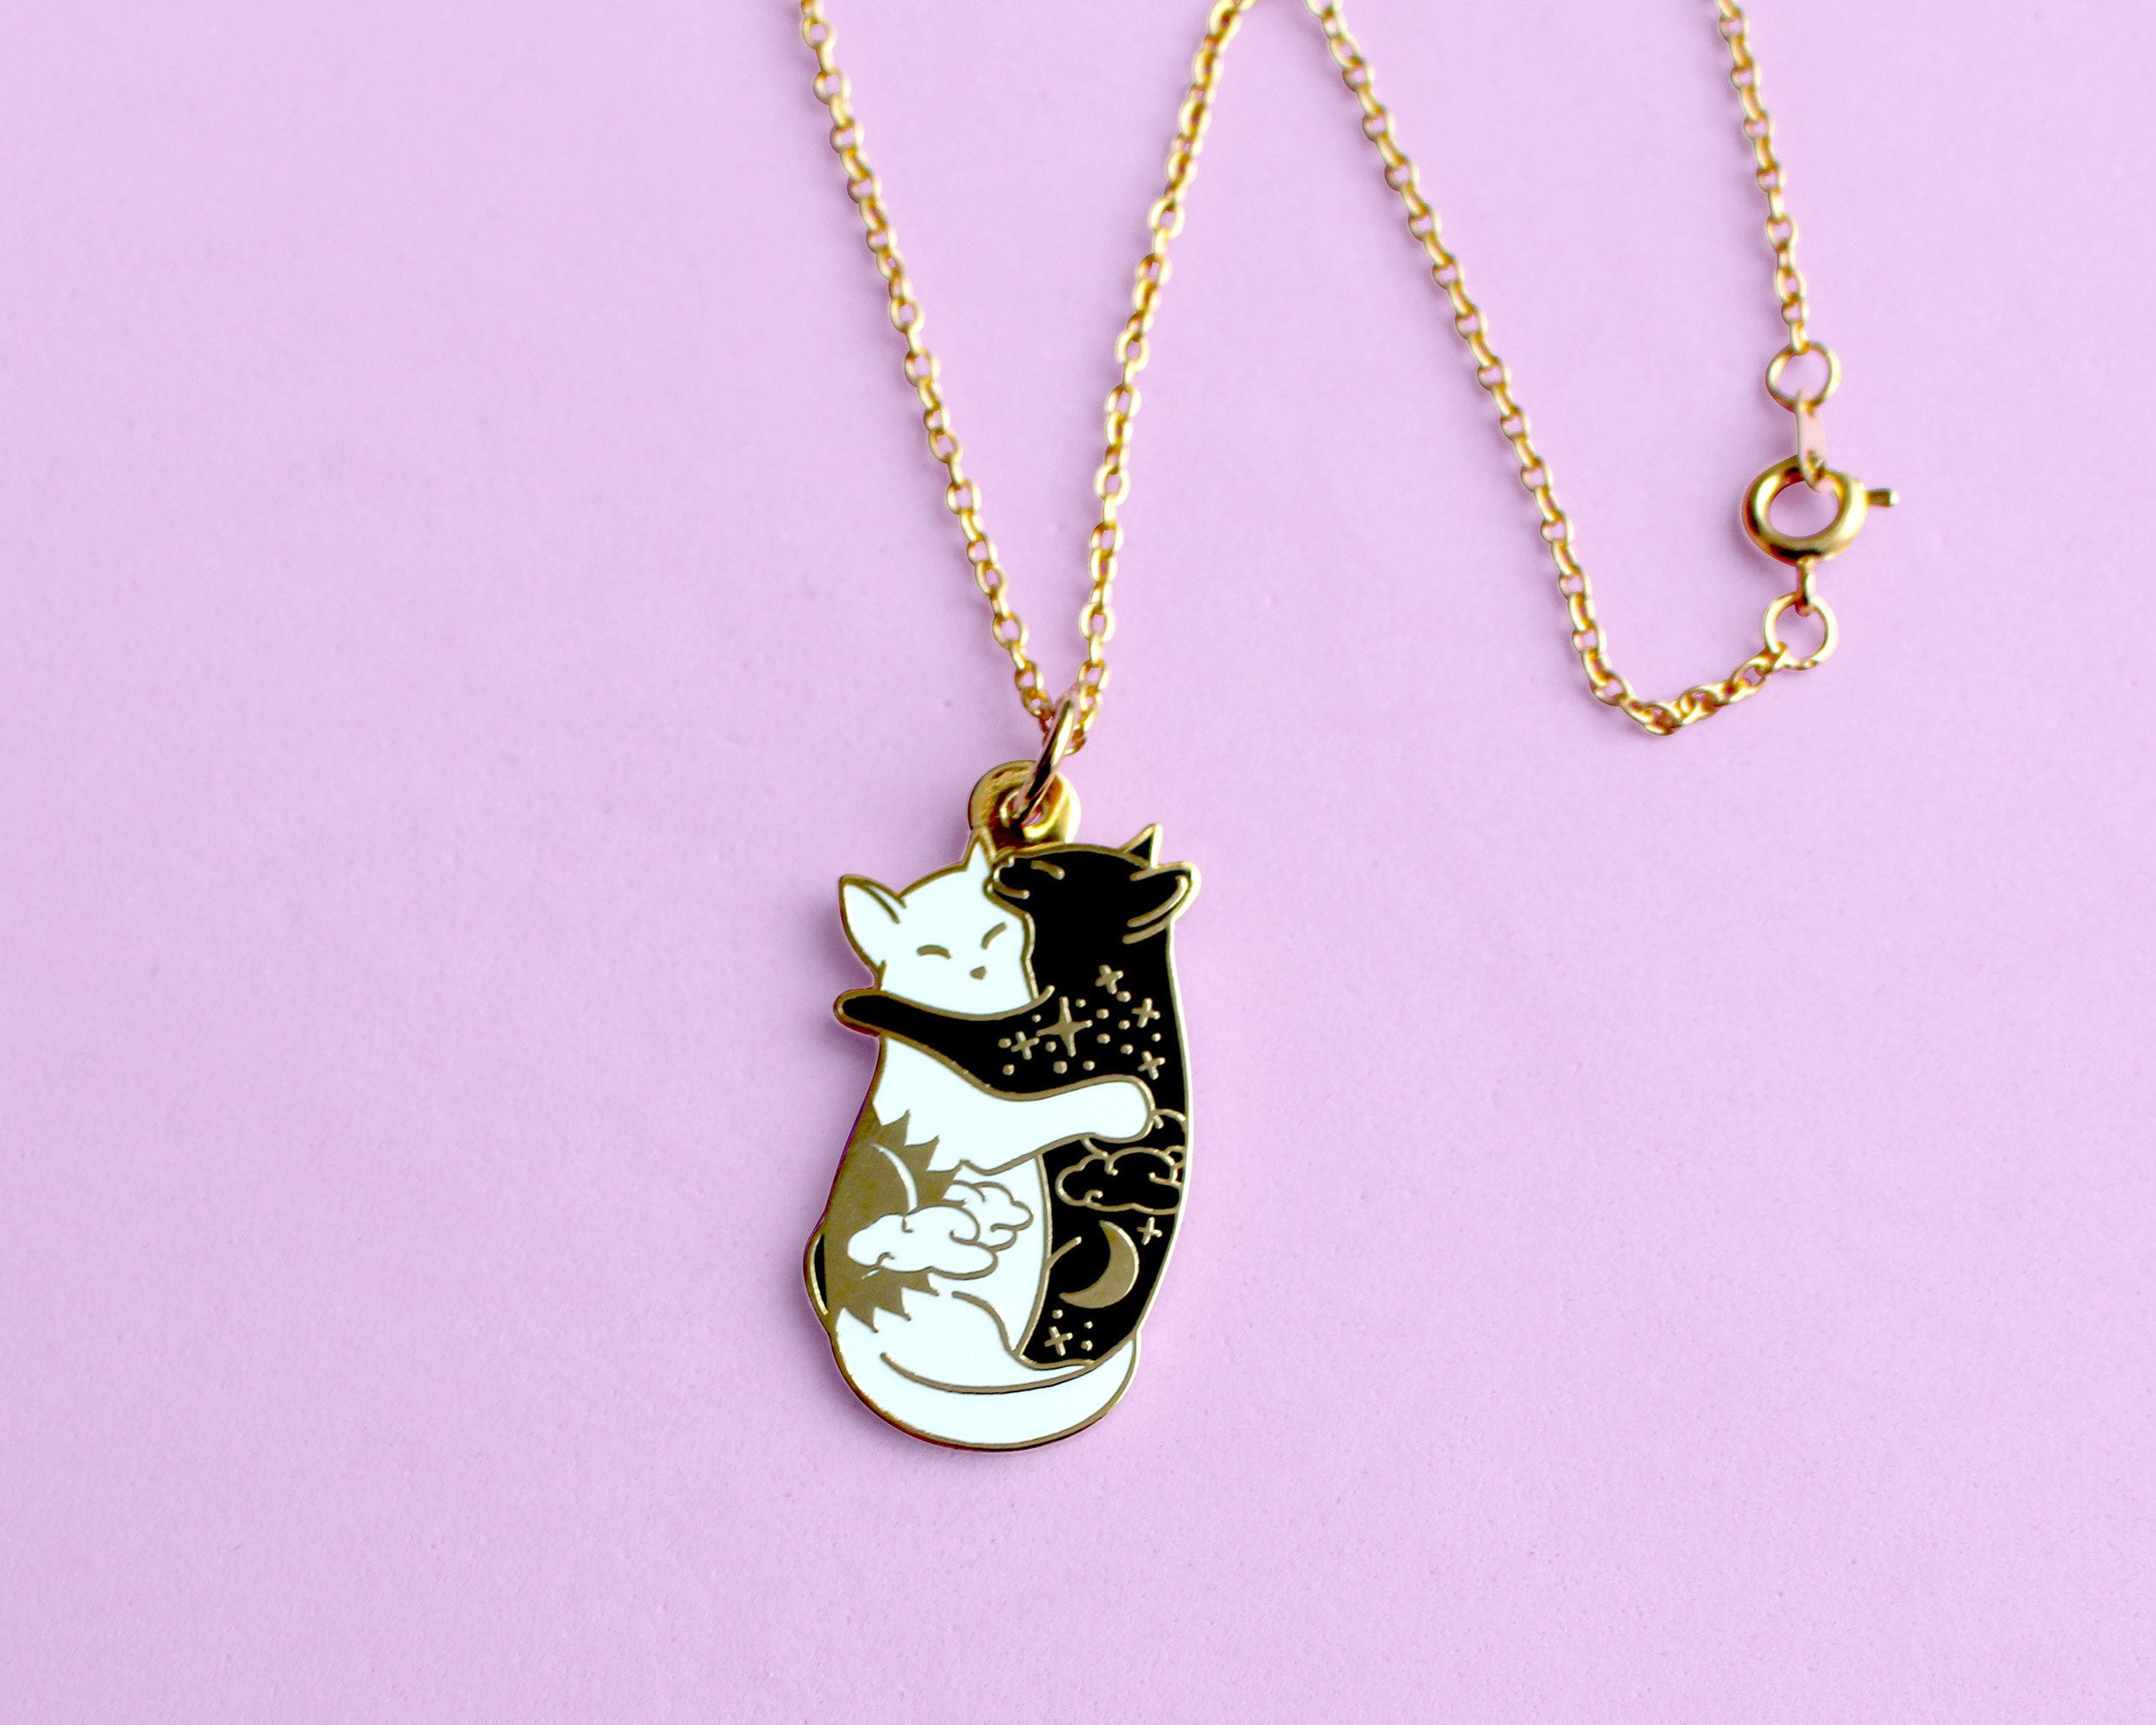 Sterling Silver Cheshire Cat Necklace, Alice in Wonderland, Alices  Adventures in Wonderland Gift, Cat Jewelry, Gift for Lover, Pendant Only -  Etsy